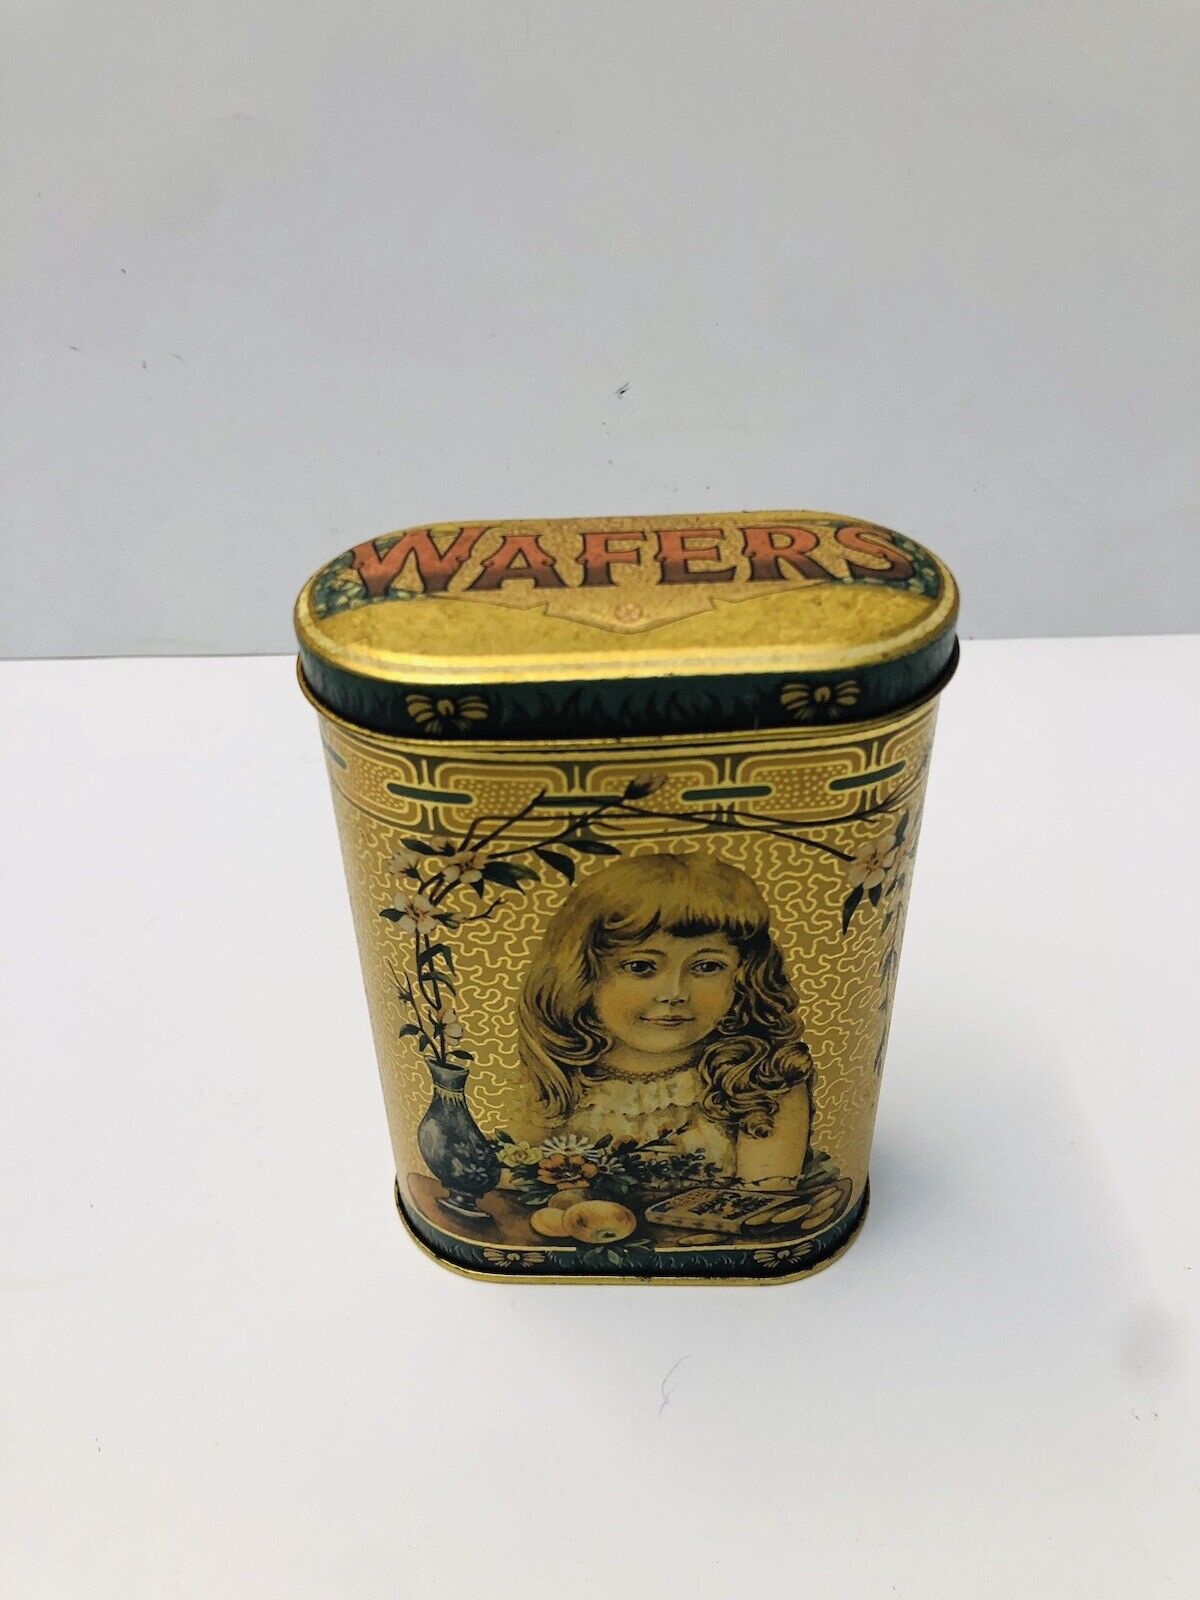 VINTAGE FAMOUS BISCUIT CO. HOMEMADE GINGER WAFER TIN BOX